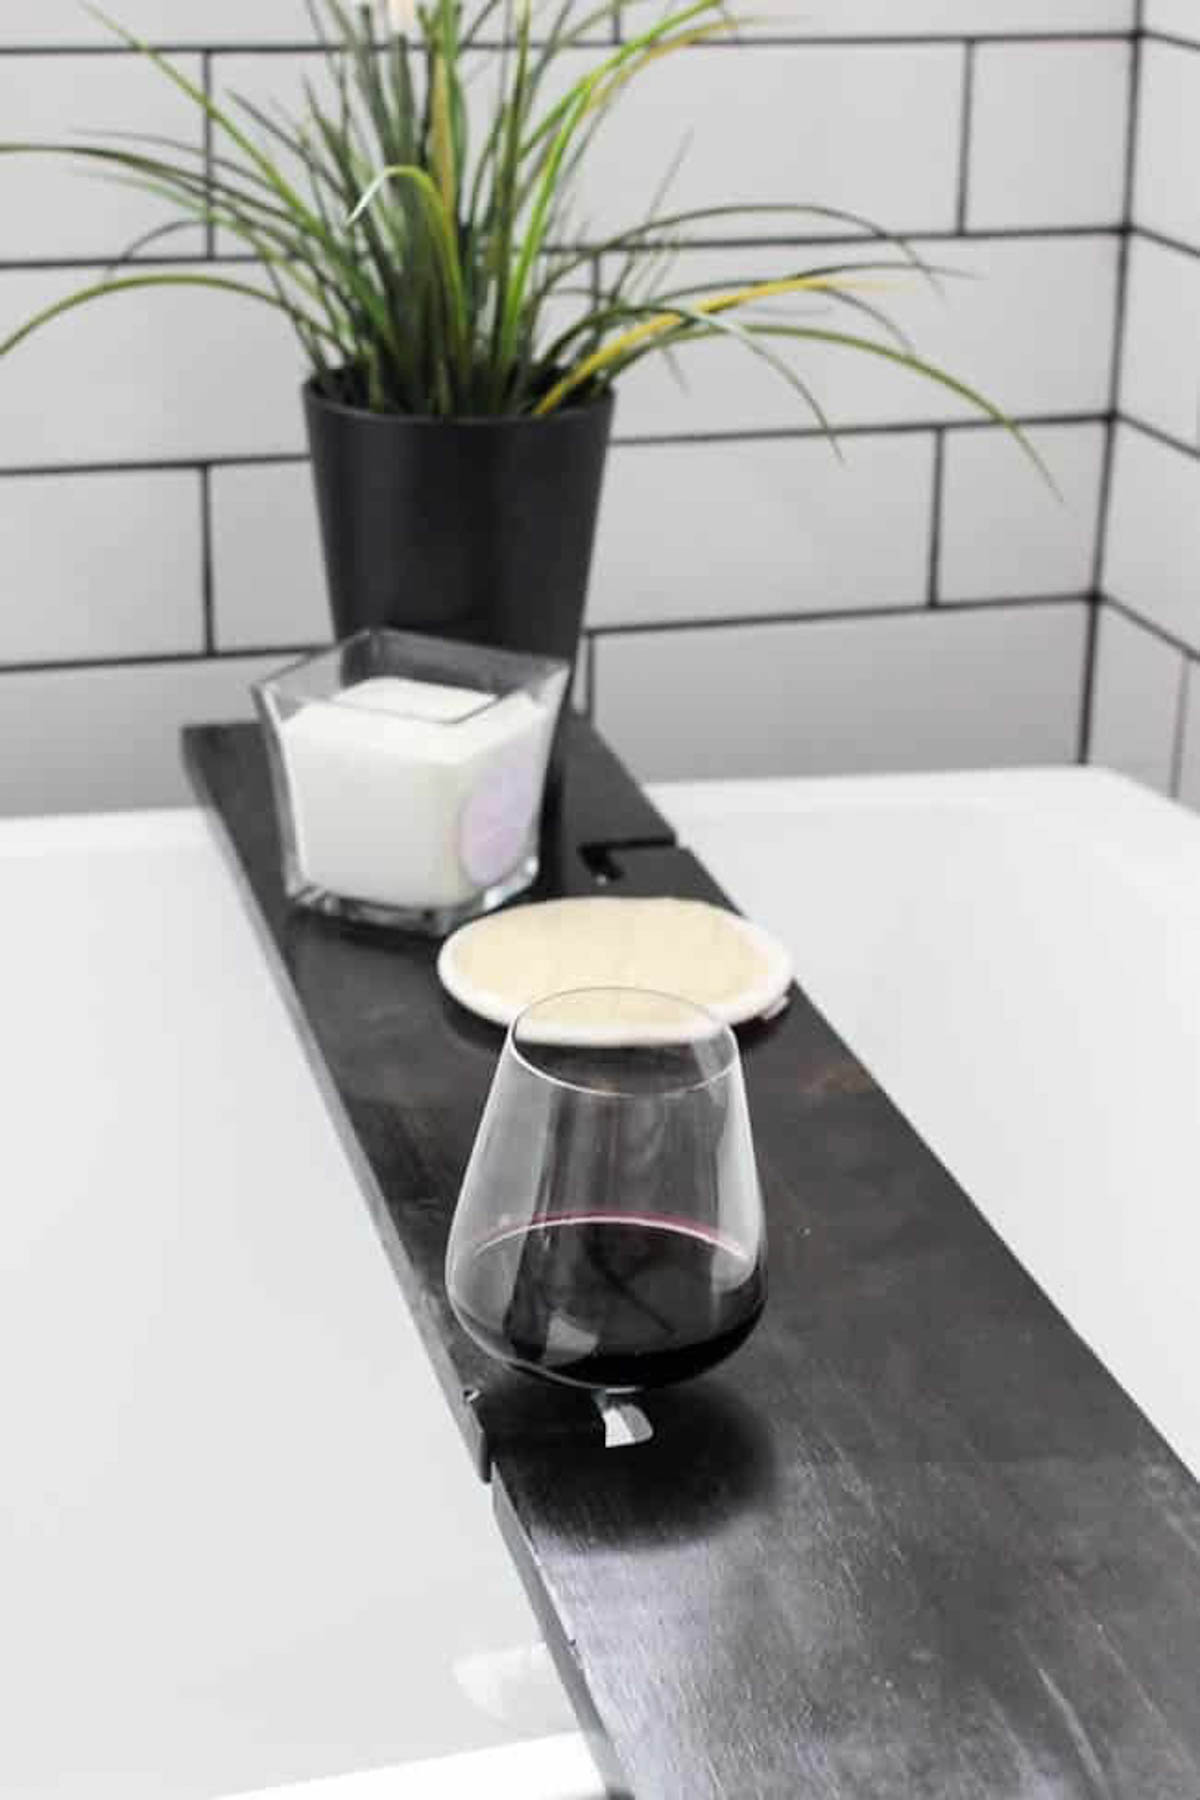 Finished bath tray on bath tub with wine glass, candle, and plant